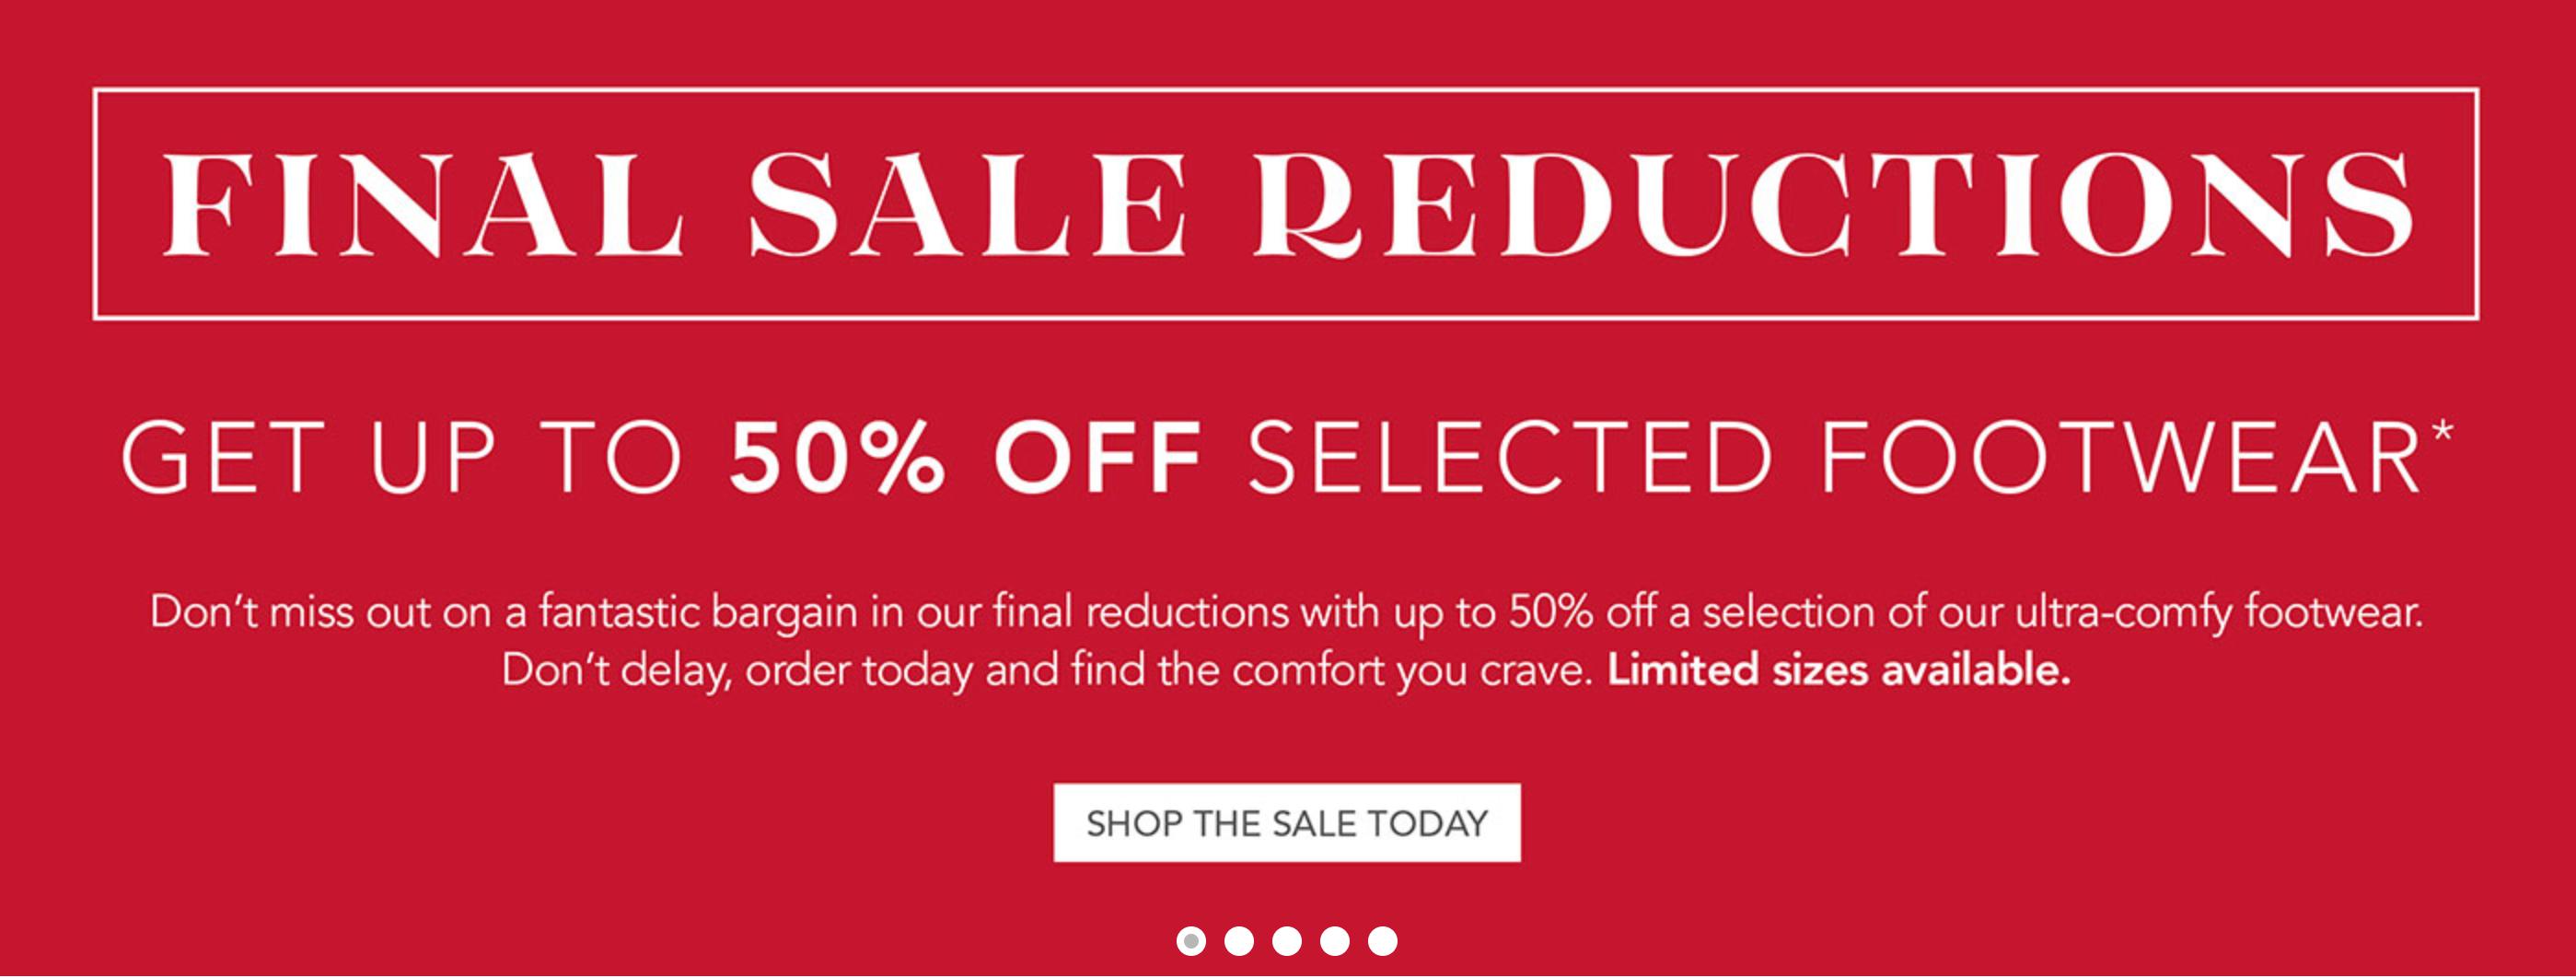 Cosyfeet: Sale up to 50% off selected footwear